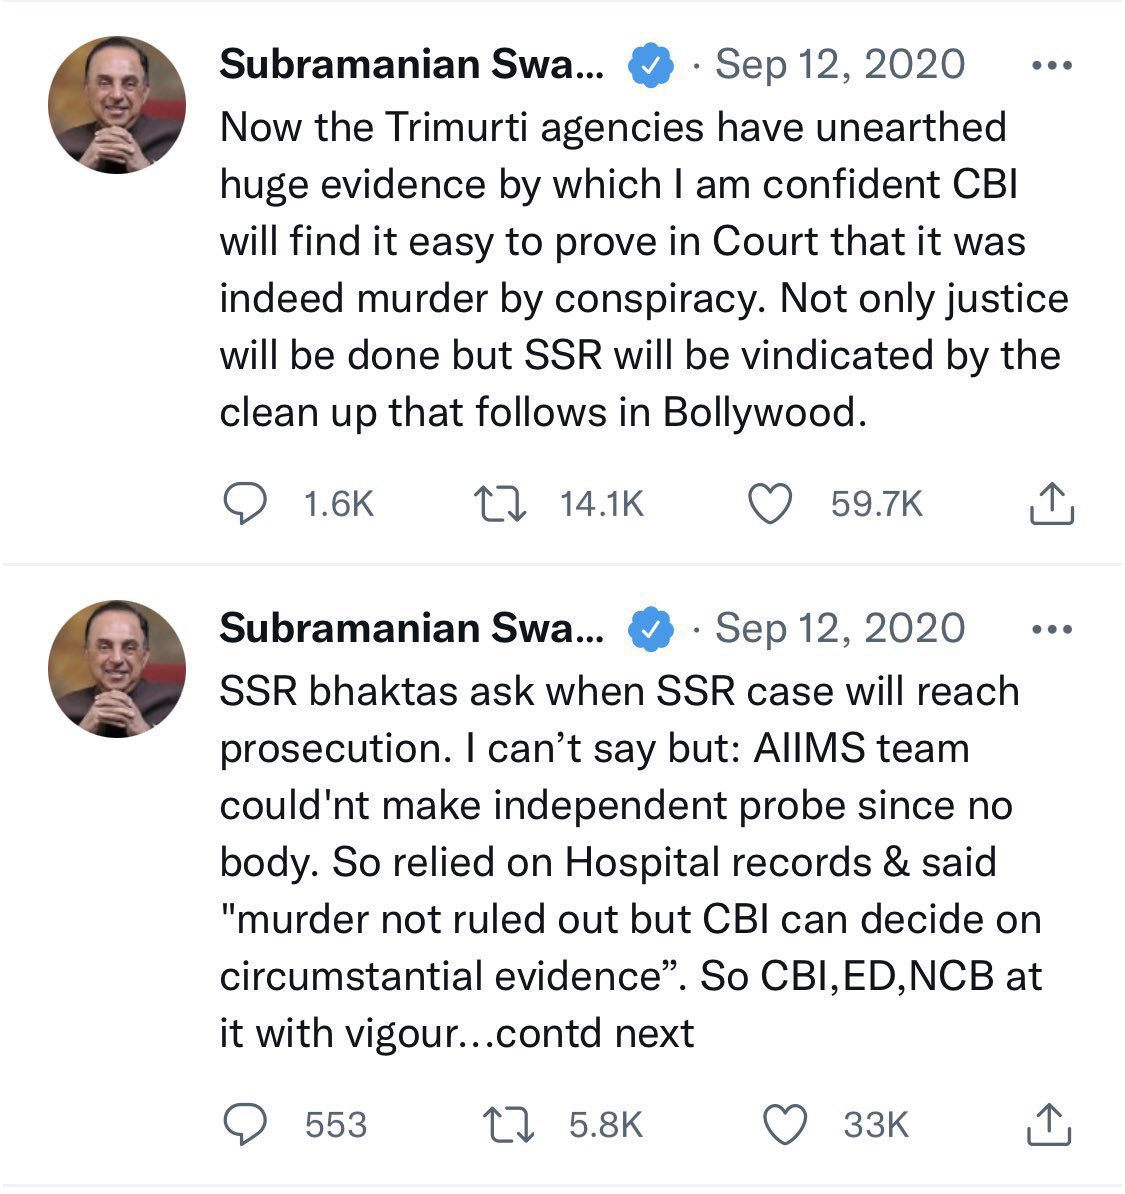 Politics BW Nexus InSSRCase

BWood cabal betrayed him in every possible way when he was amongst them & post his death

MuPo alongwith Political cabal did everything to coverup & take forward d fake suic!de narrative alongwith opposing #CBI4SSR

Day 1188 of injustice to .@itsSSR🔥